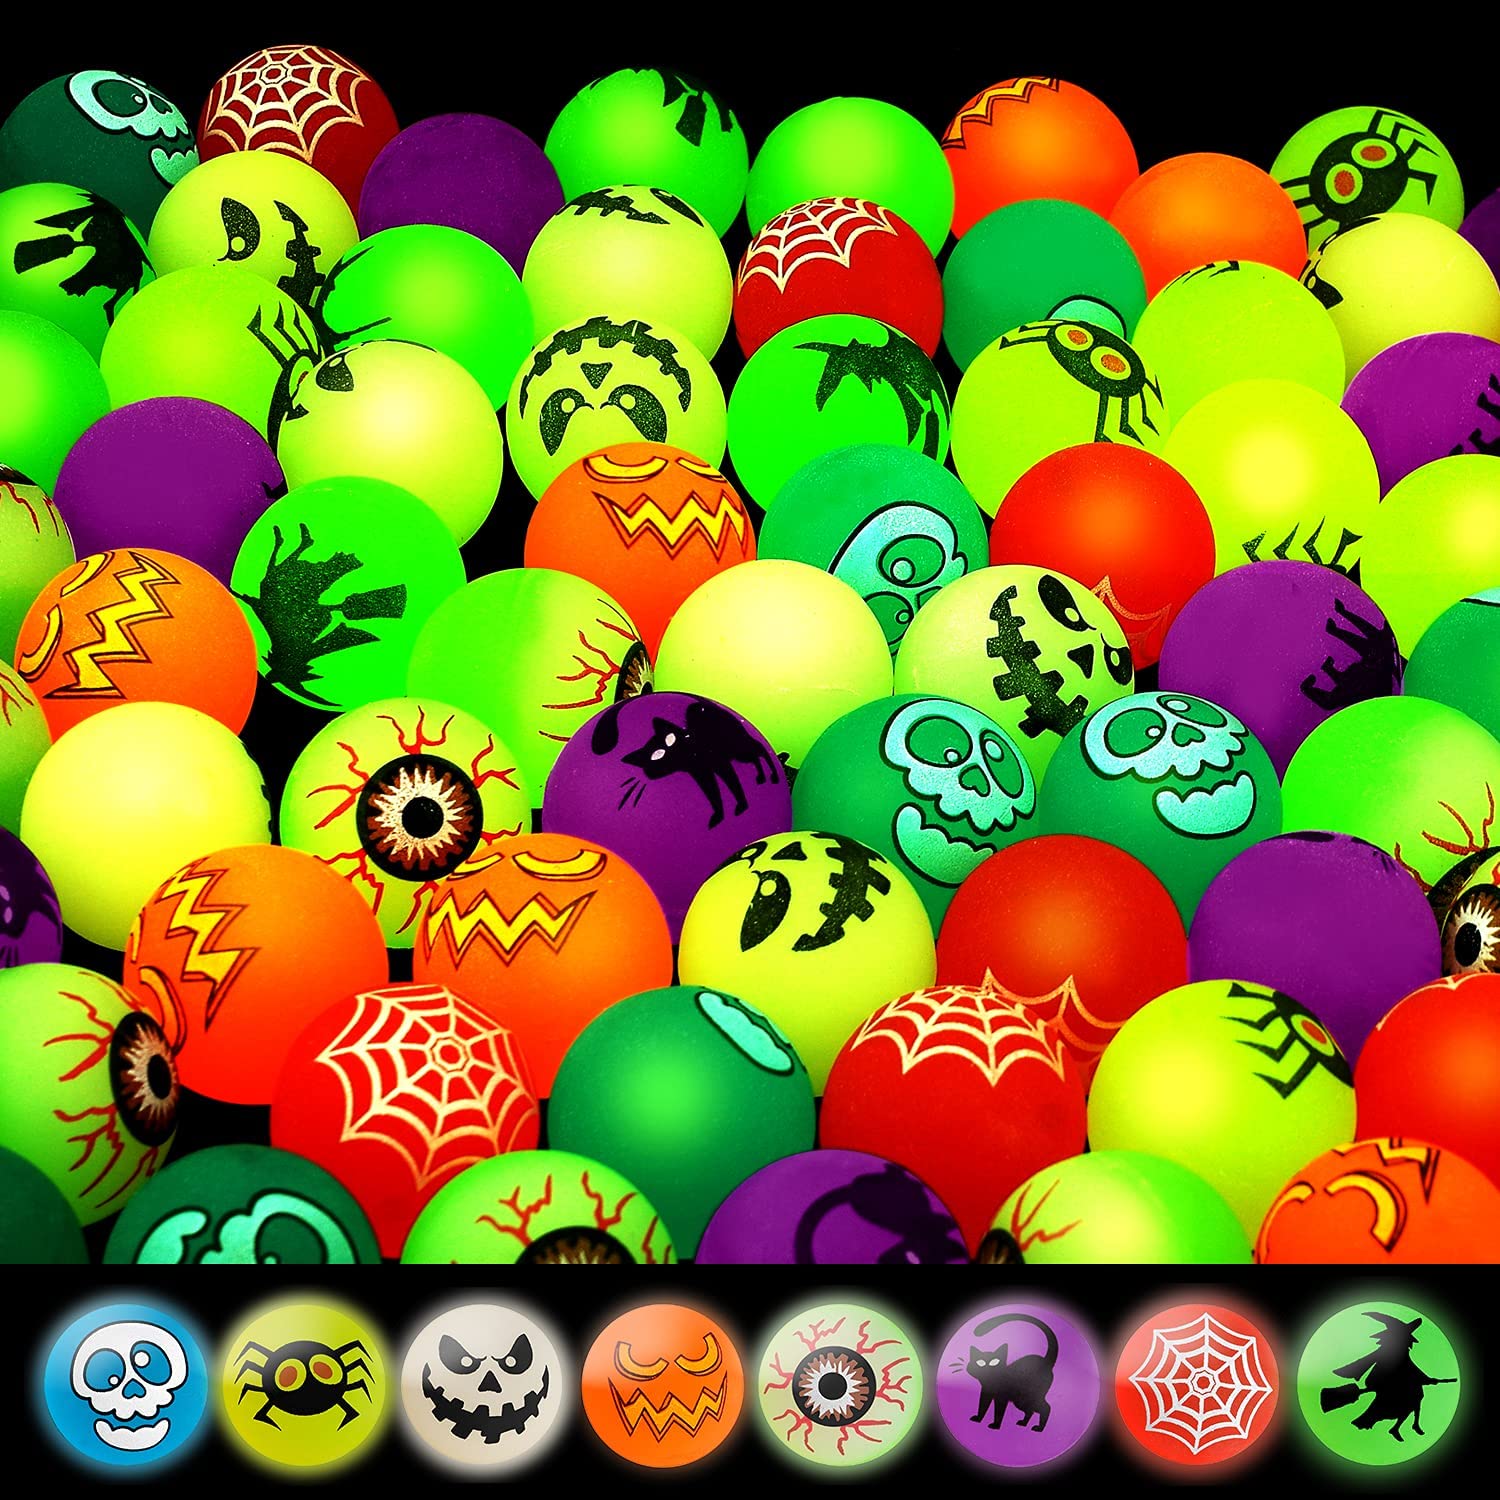 27 mm/ 1 inch 40 Pieces Bouncing Balls Mixed Halloween Bouncy Balls with 5 Halloween Theme Designs for School Classroom Game Rewards Trick or Treating Goodies 